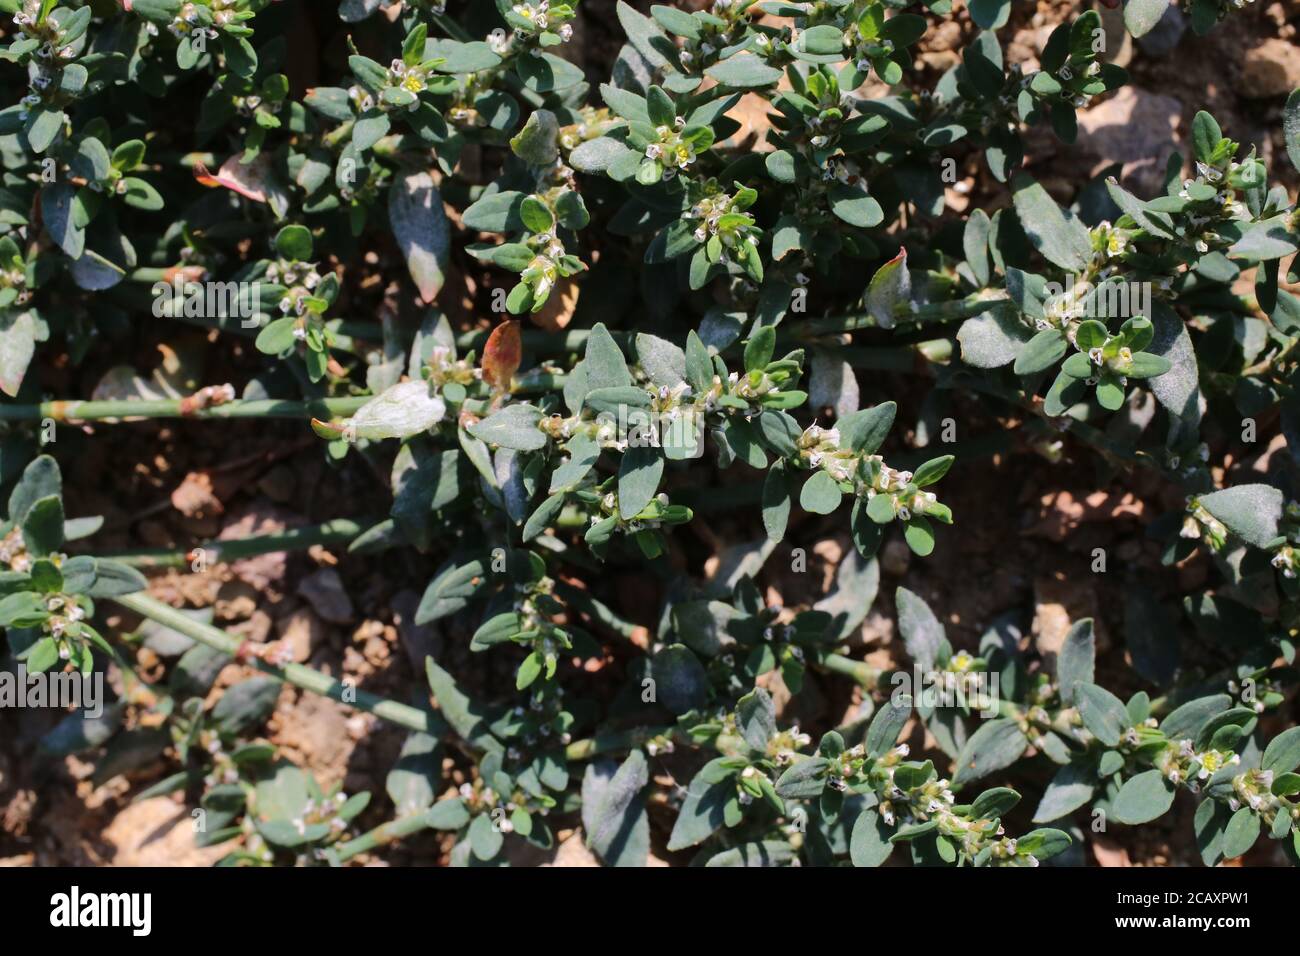 Polygonum aviculare, Knotgrass. Wild plant shot in summer. Stock Photo